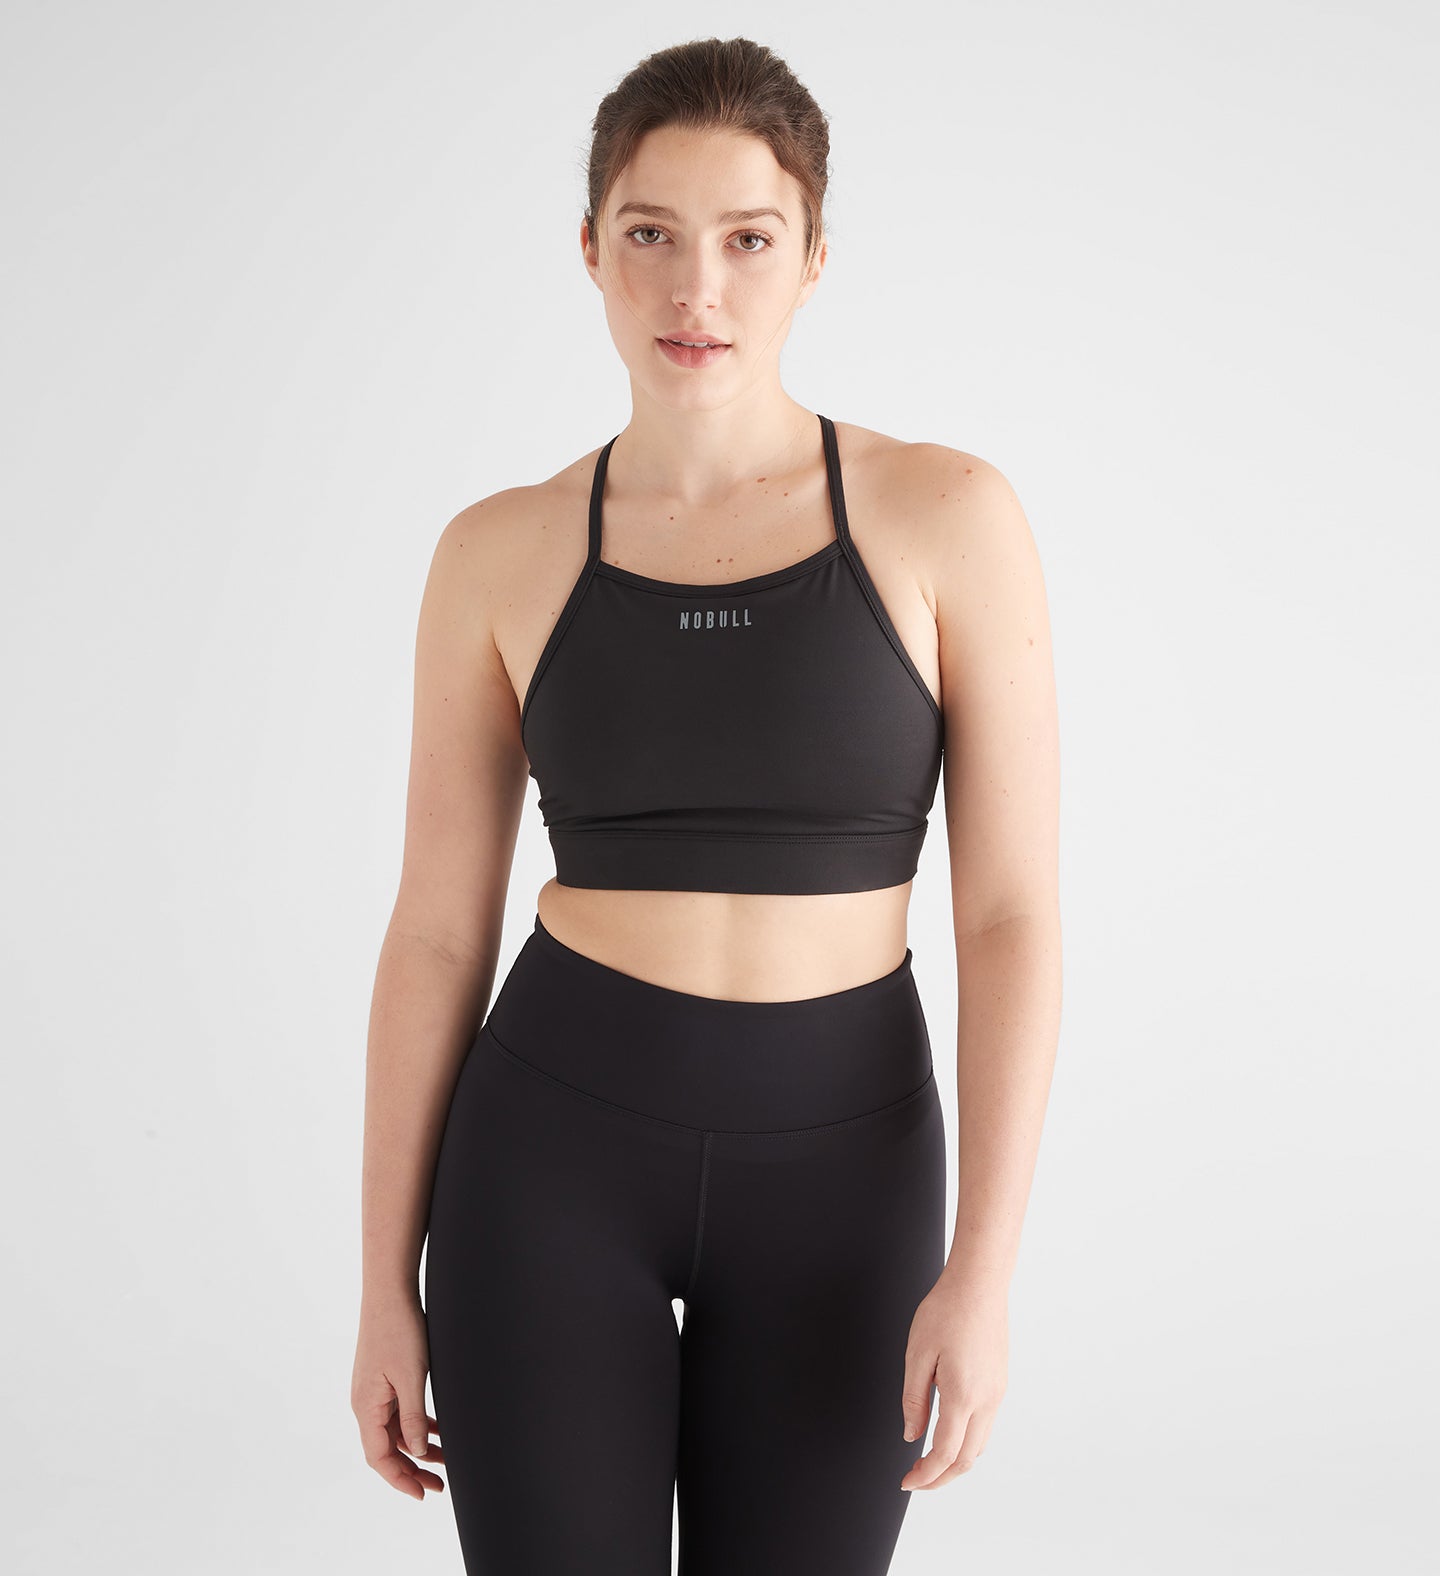 Nobull Brown No Bull Sports Bra Size XS - $38 New With Tags - From Maeve